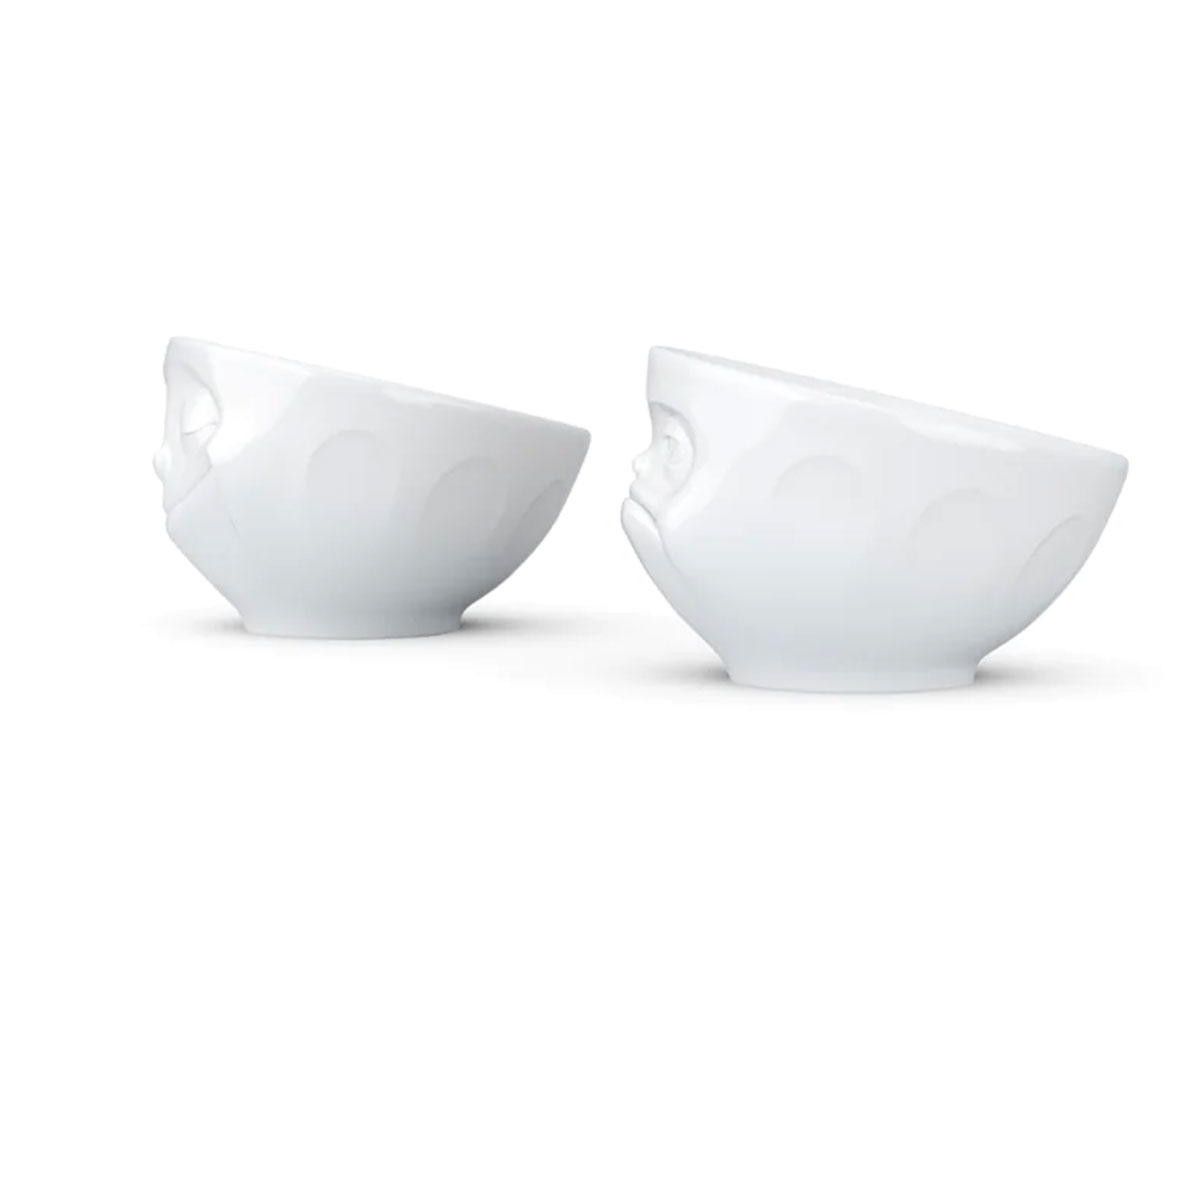 2 White Porcelain Egg Cups by Tassen - Happy and Angry